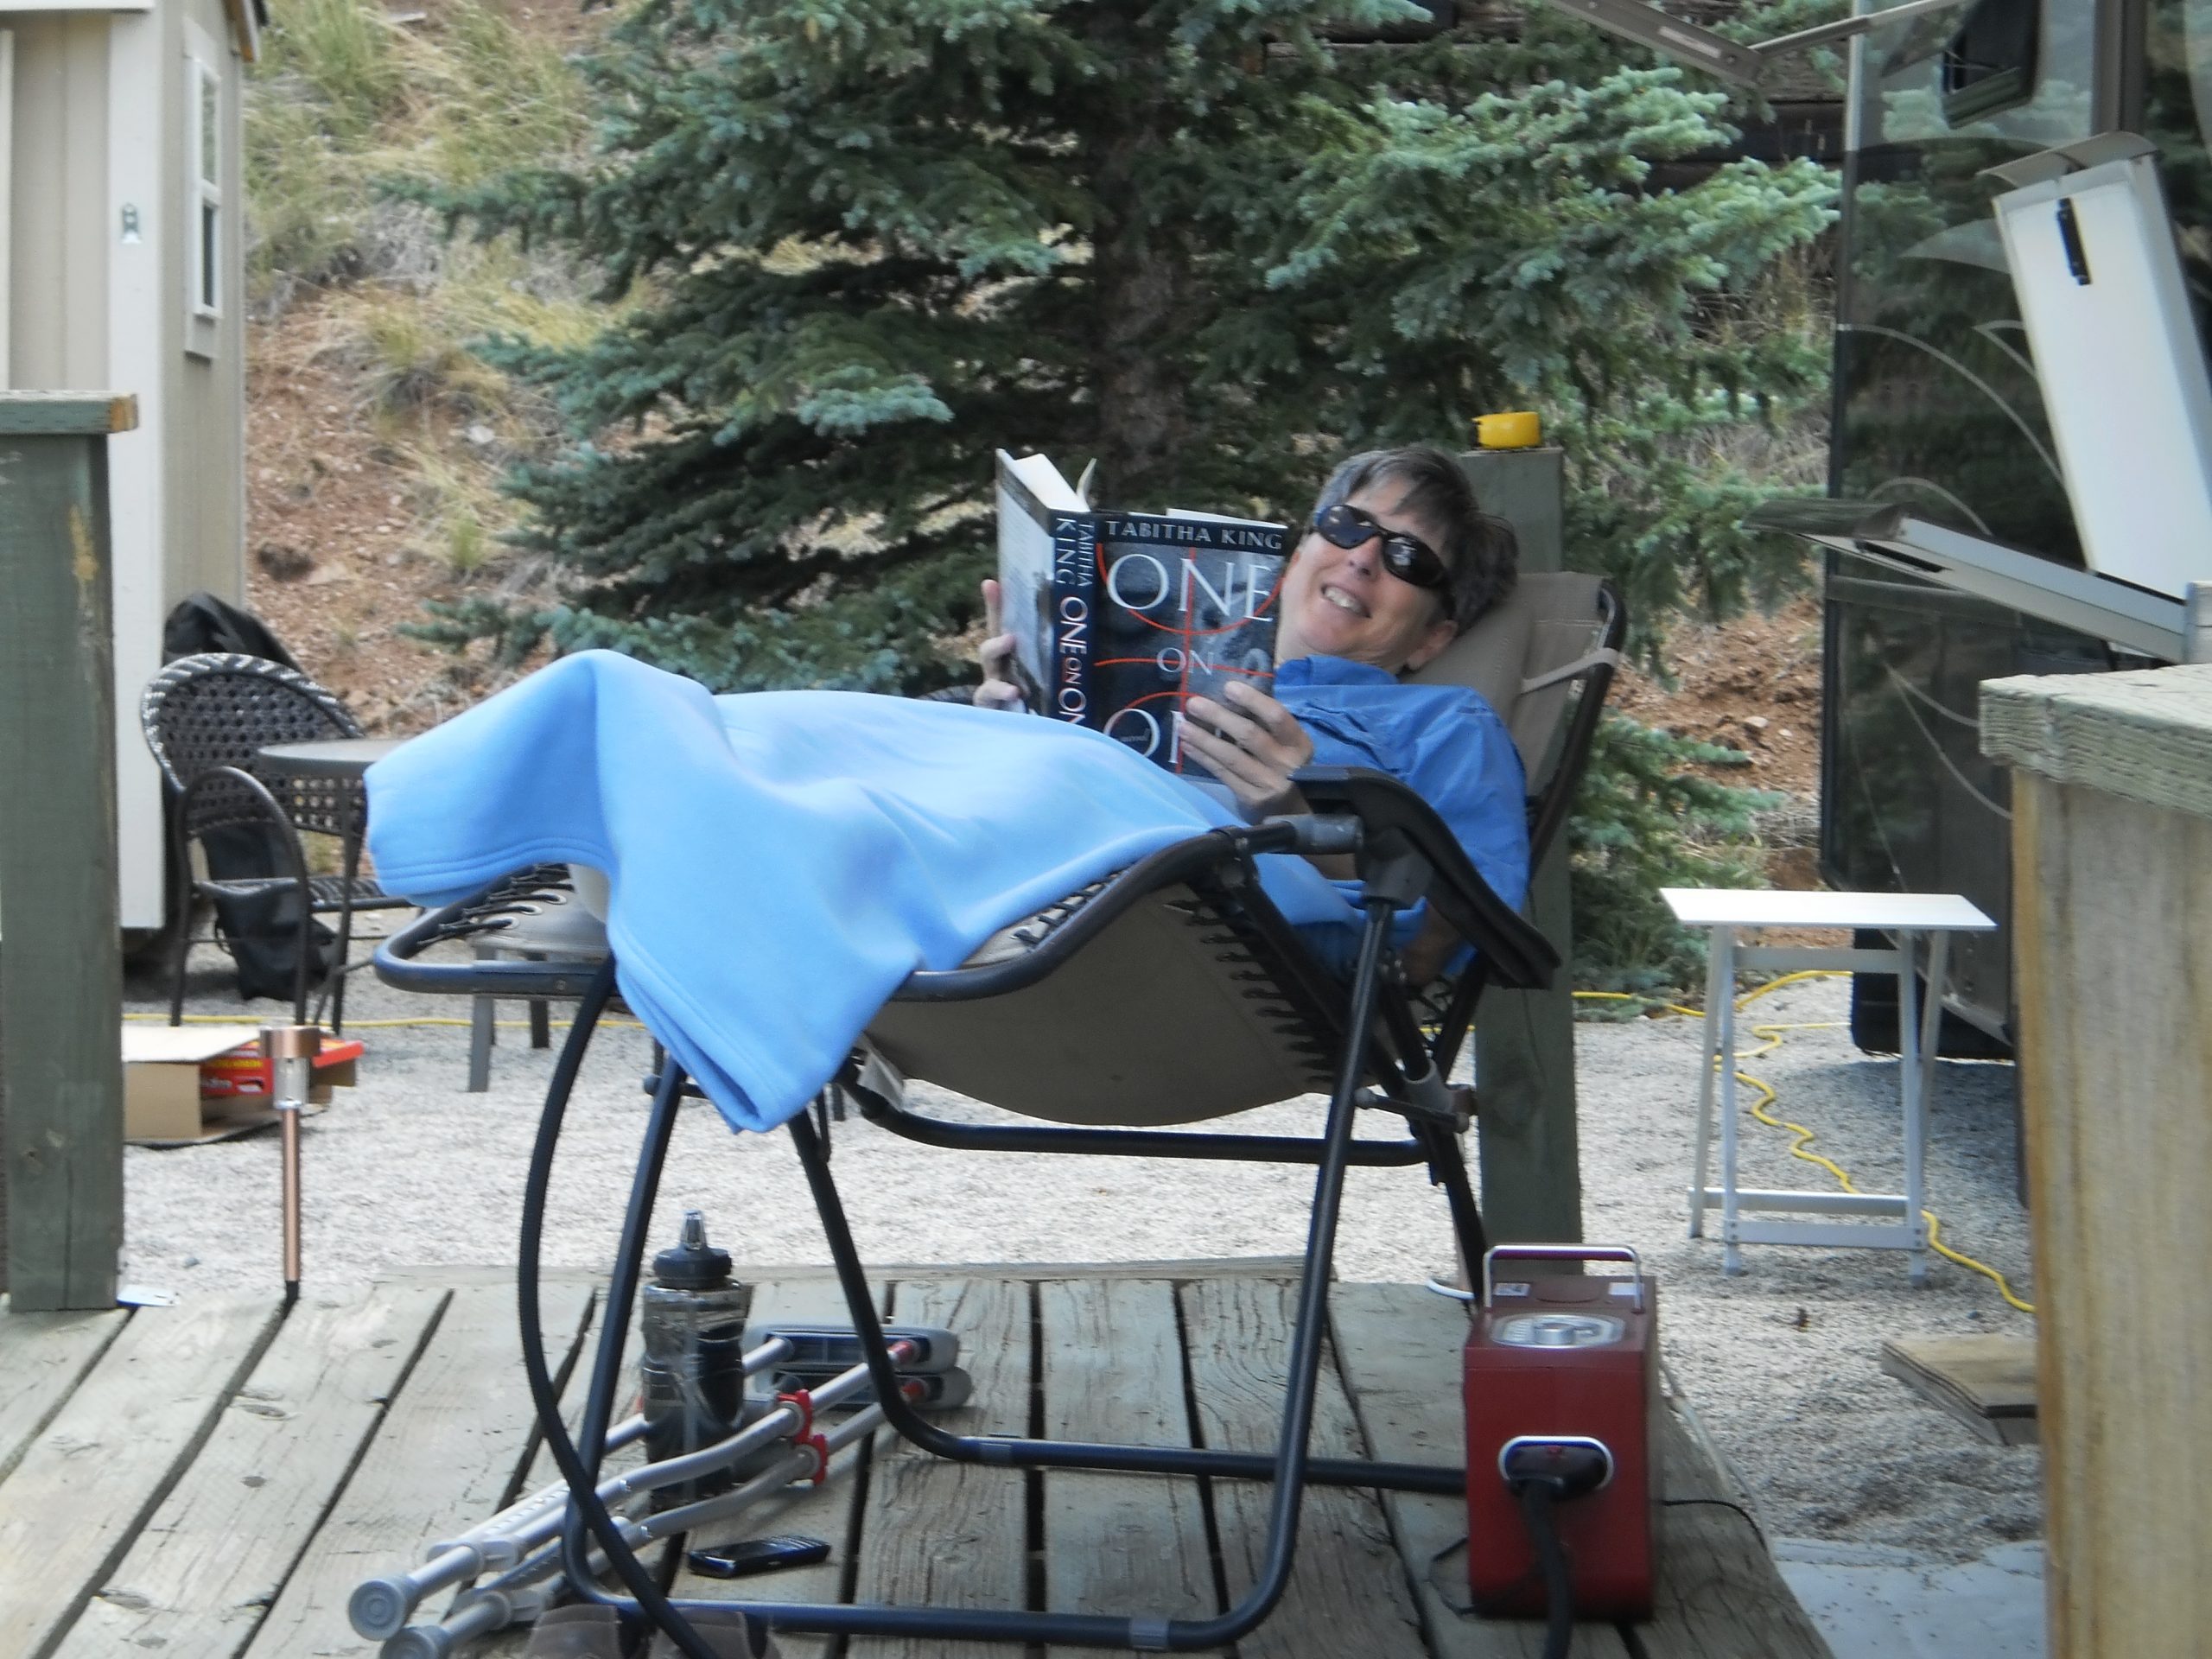 RVer recovering from knee surgery in a recliner, outside next to a motorhome.